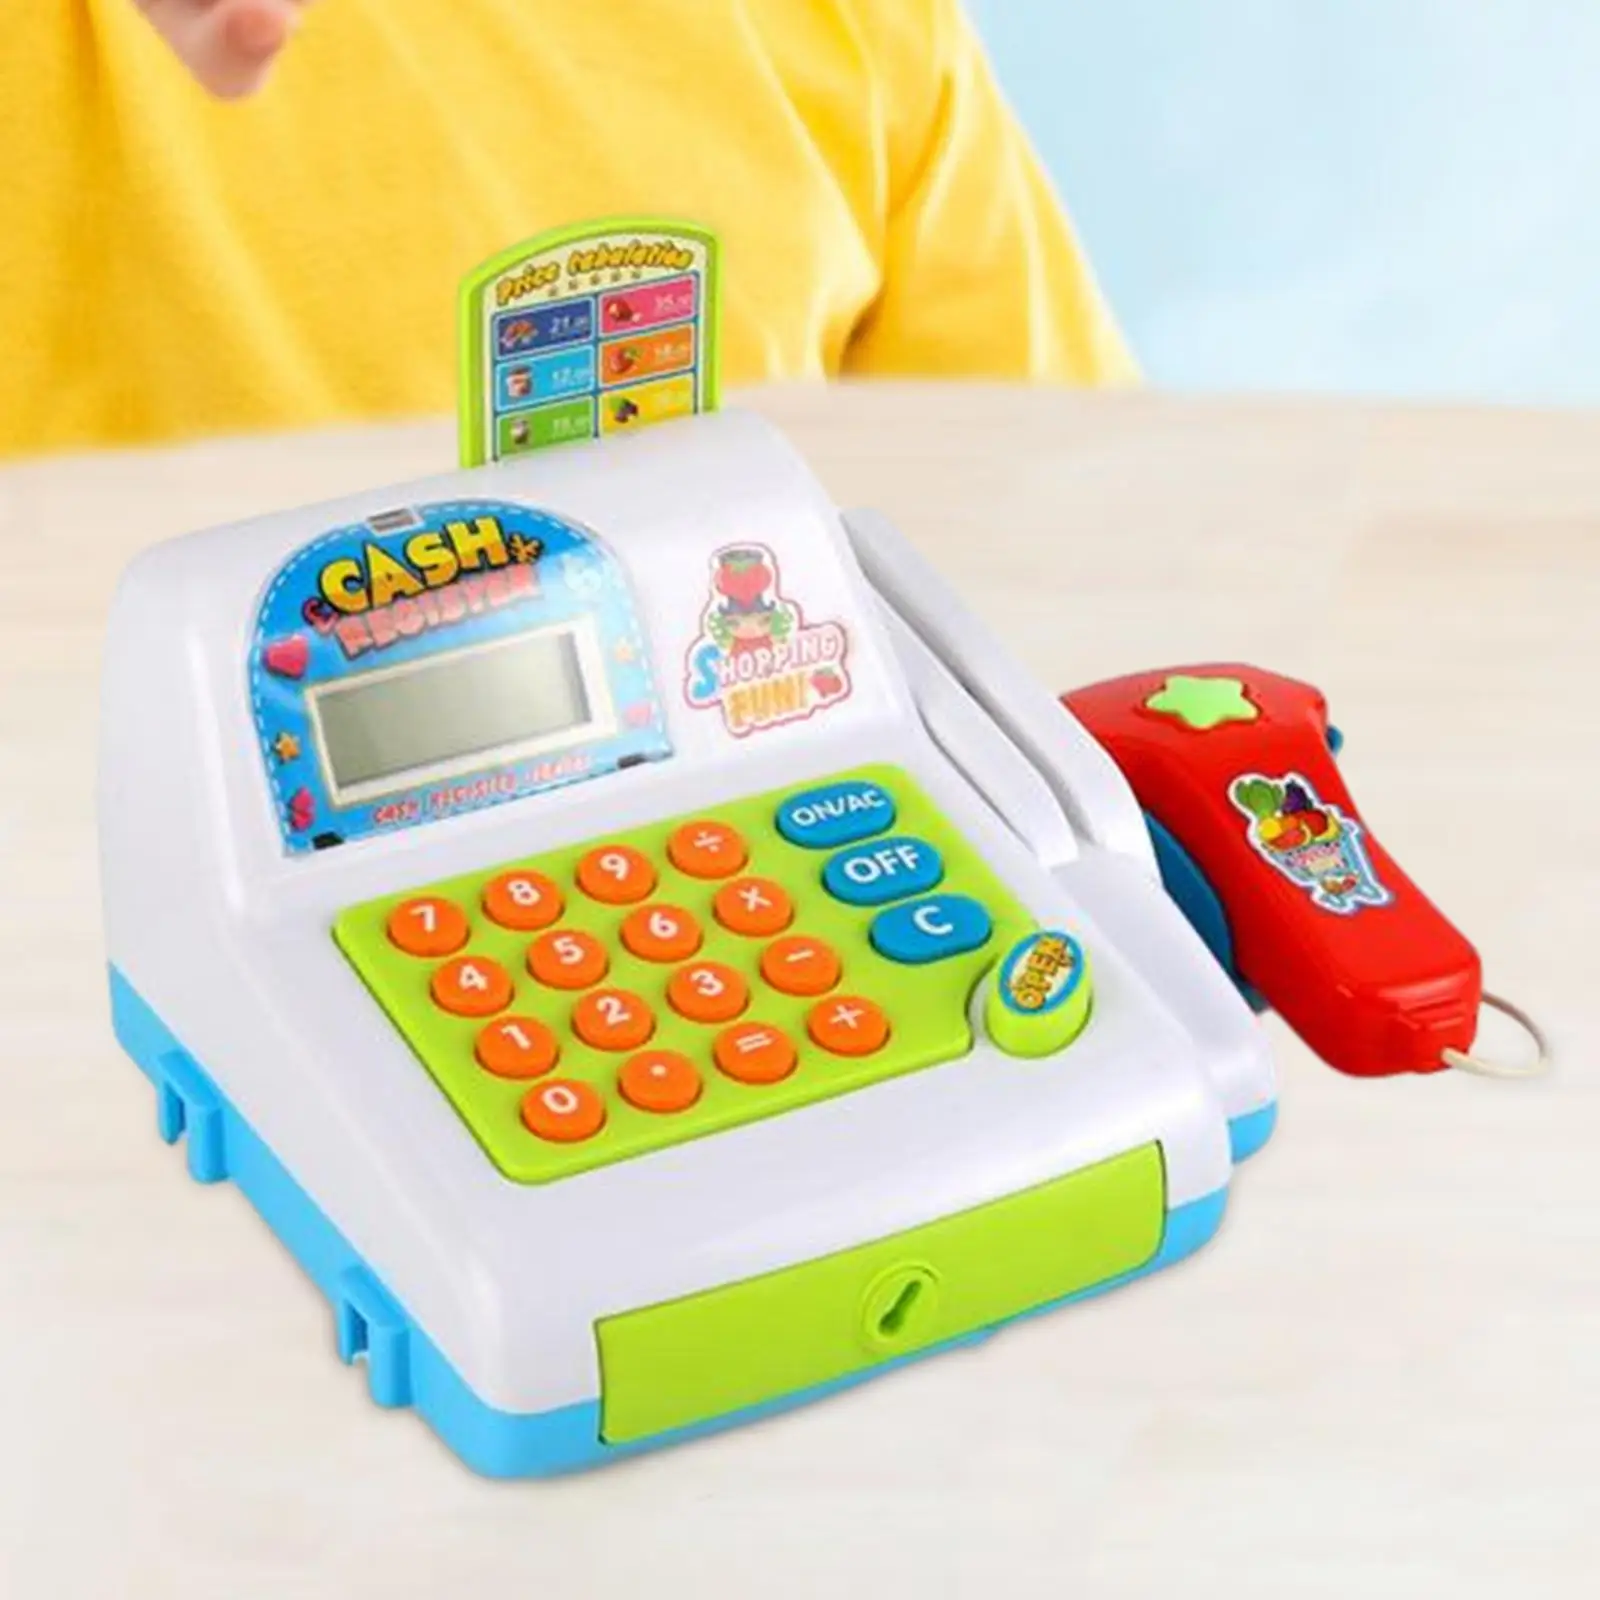 Supermarket Cash Register Play House Toys Cash Calculator with Sound Lights Development for Children Kids Girls Toddlers Gifts